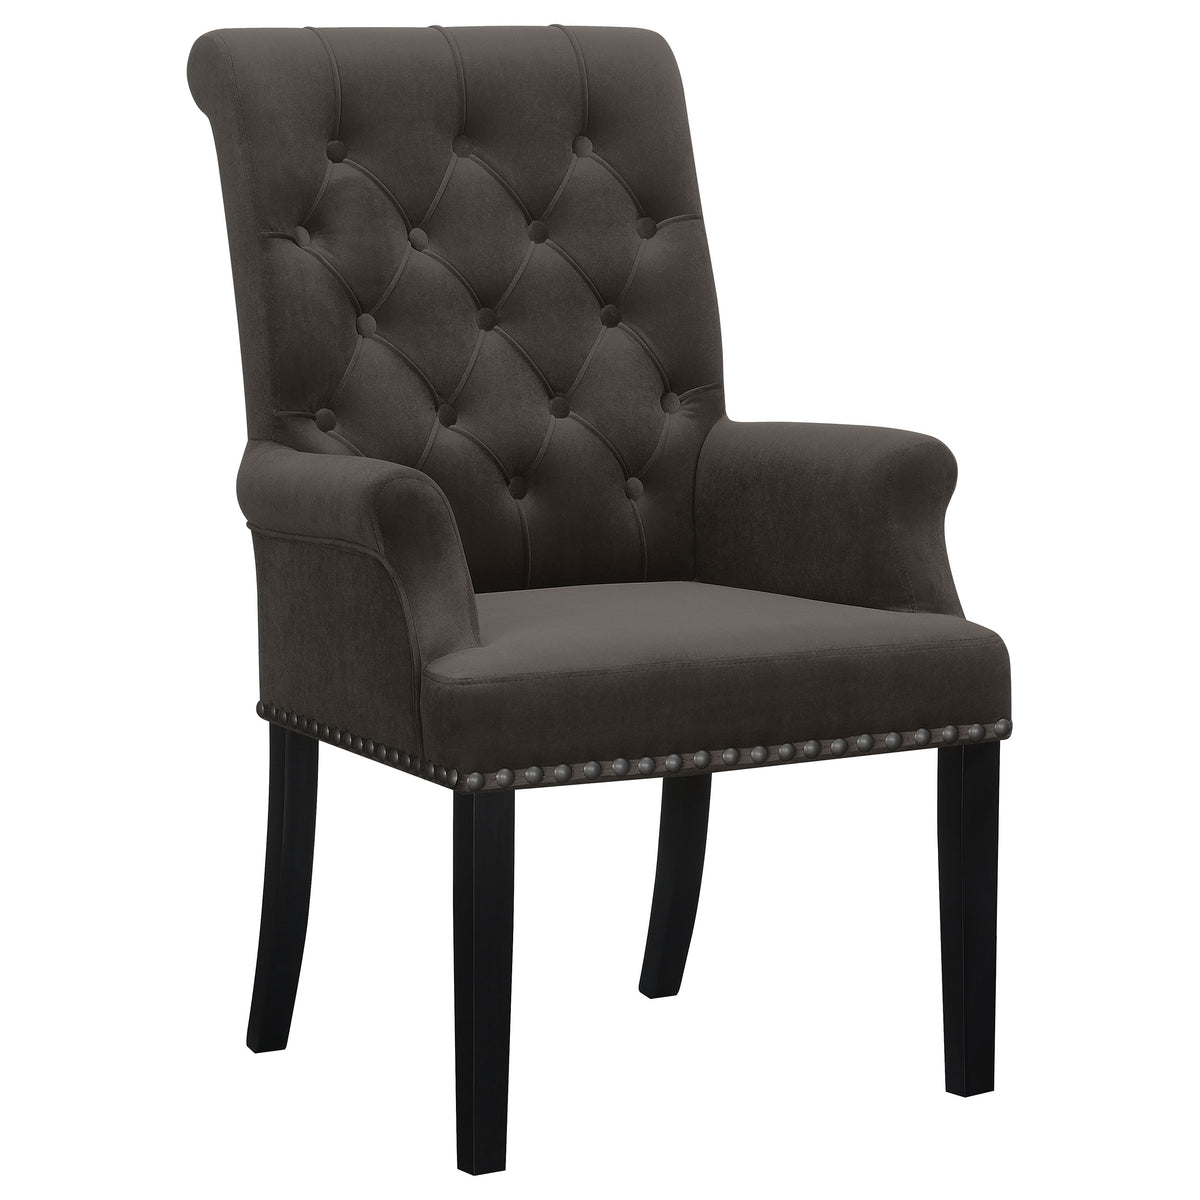 Alana Upholstered Tufted Arm Chair with Nailhead Trim - Half Price Furniture